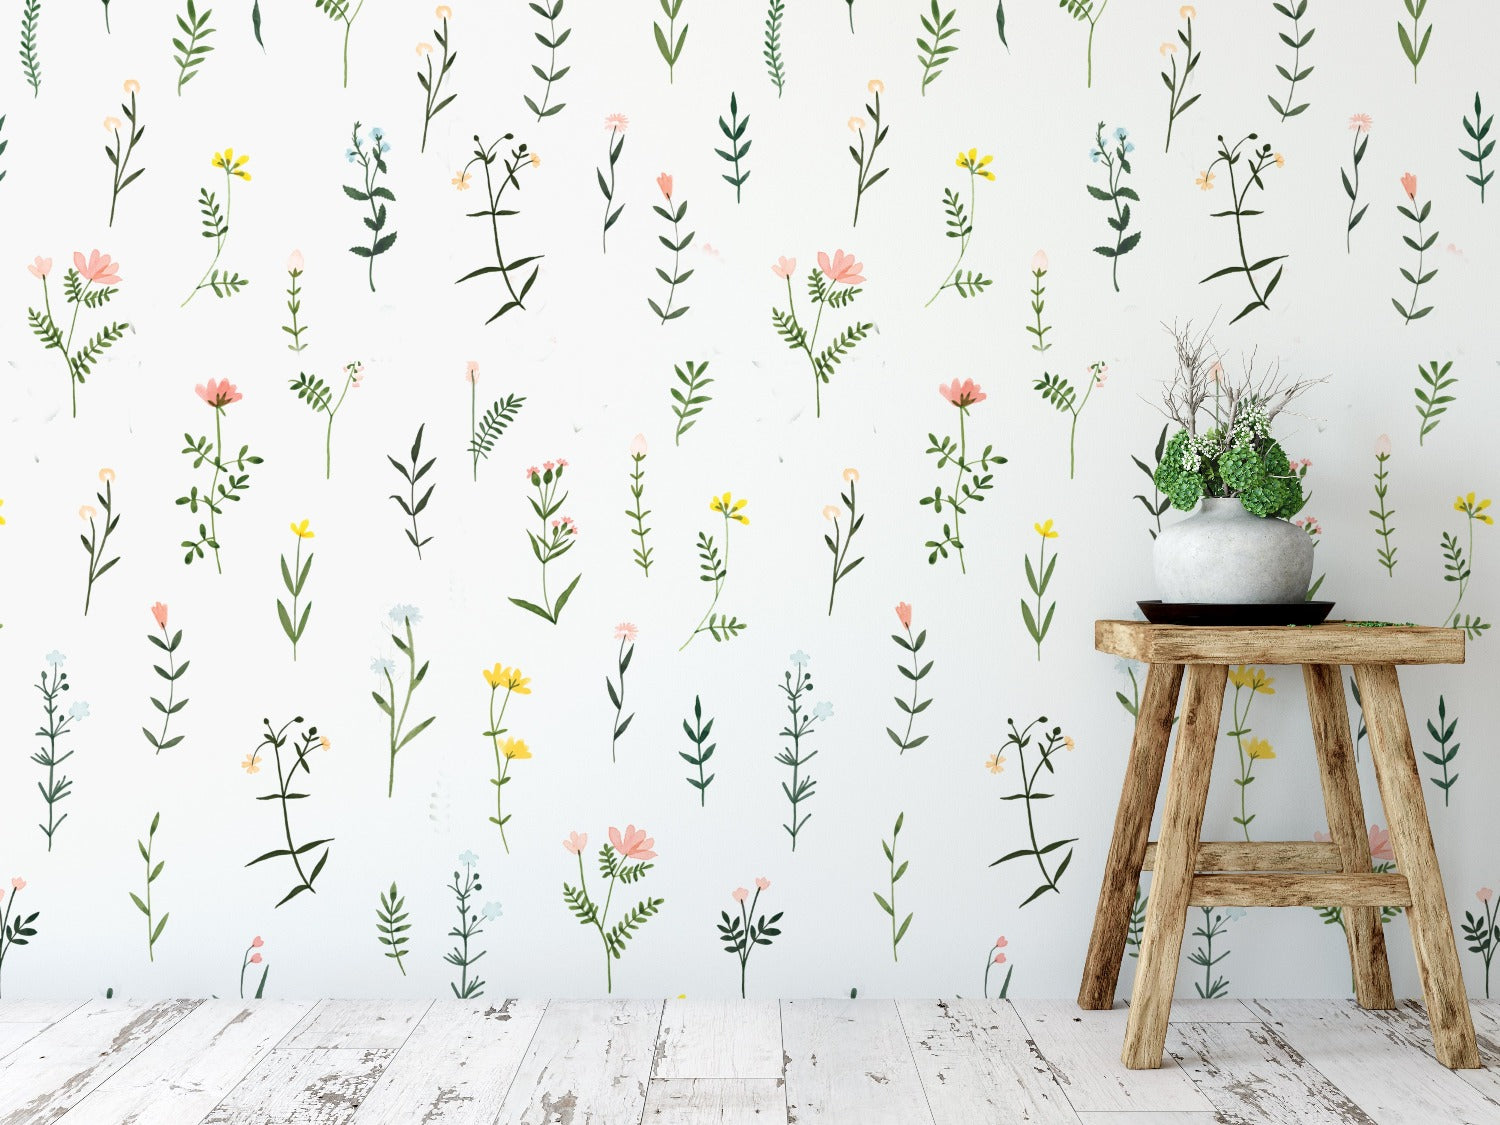 A rustic wooden stool stands against a wall adorned with 'Floral Wallpaper - XII'. The wallpaper's cheerful botanical pattern featuring small, sprightly flowers and leaves infuses the space with a light, airy ambiance, reminiscent of a spring day in the countryside.